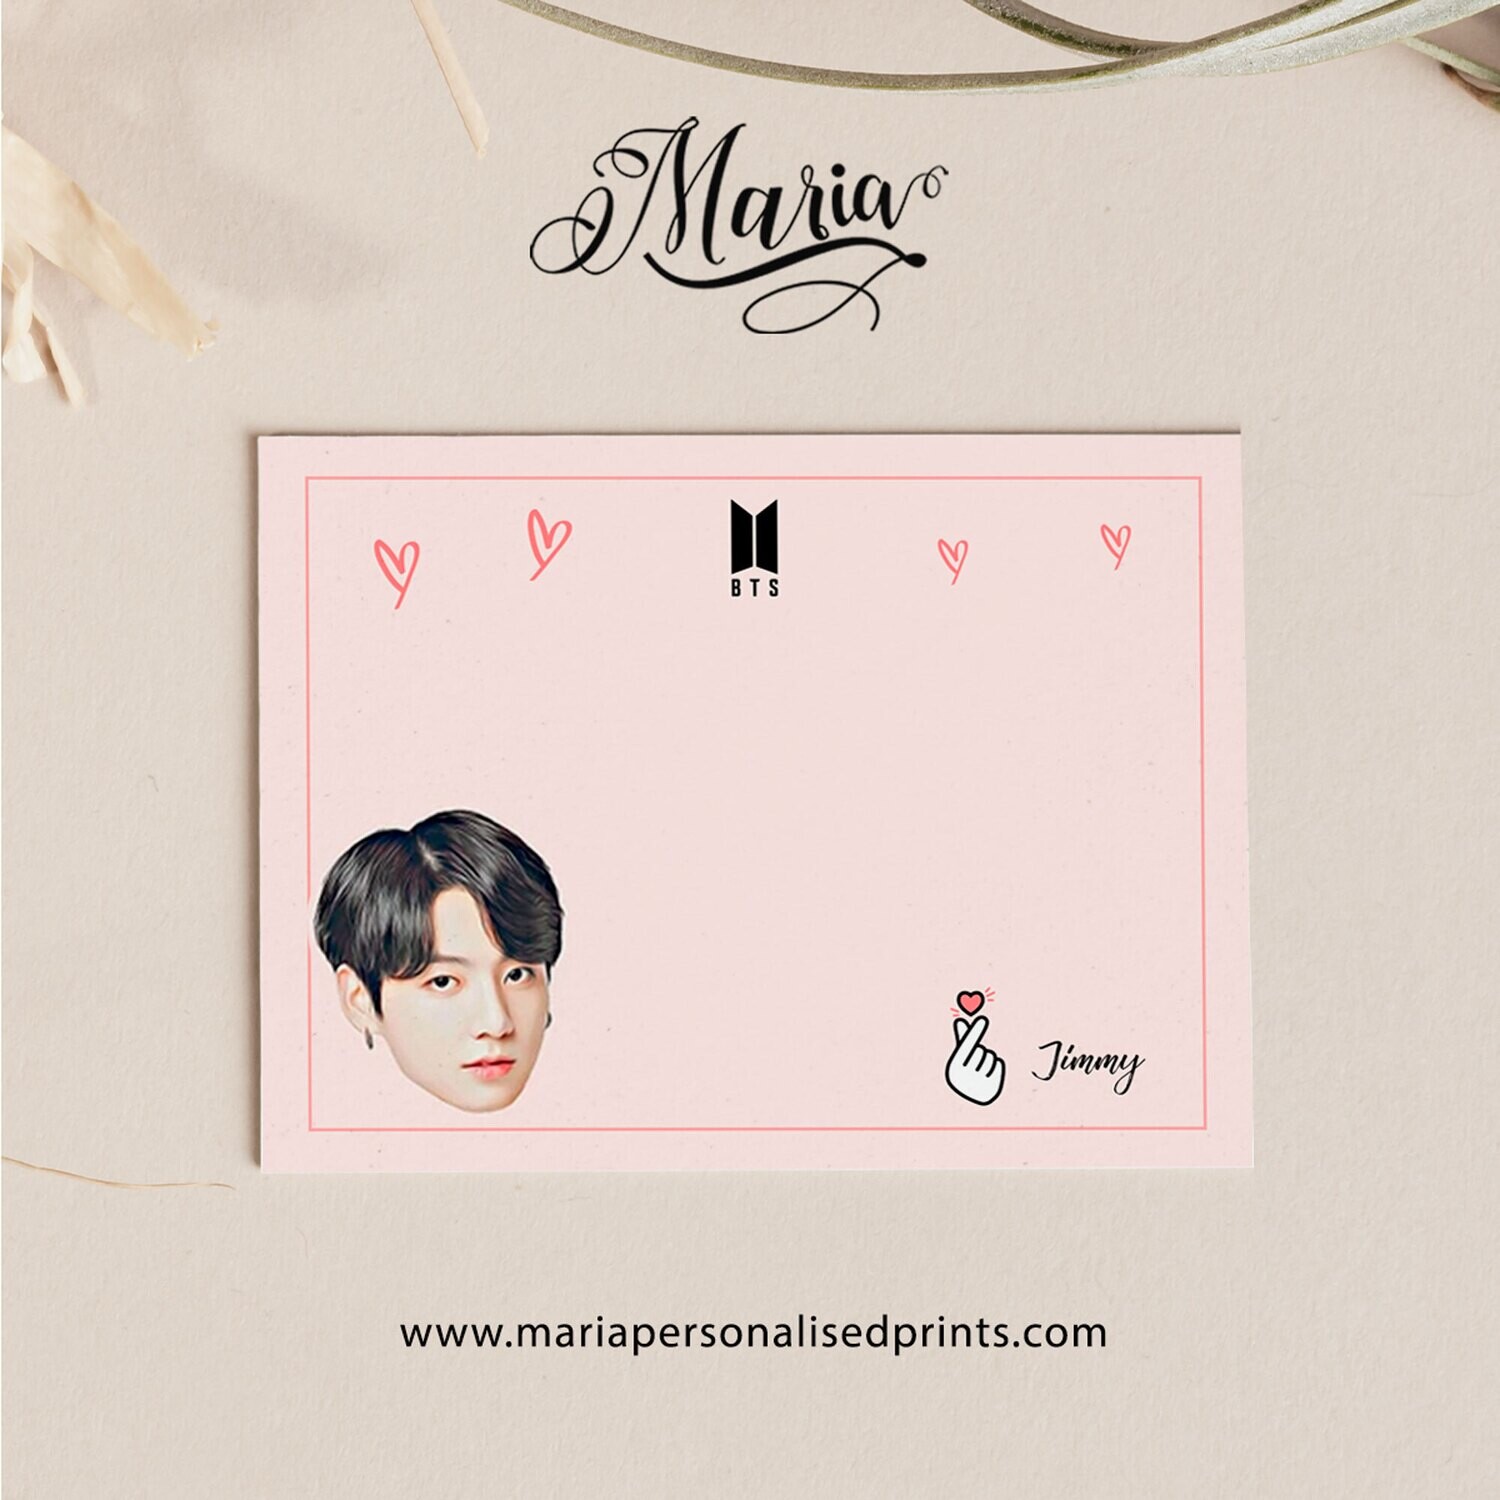 Personalized Note Cards BTS NC001